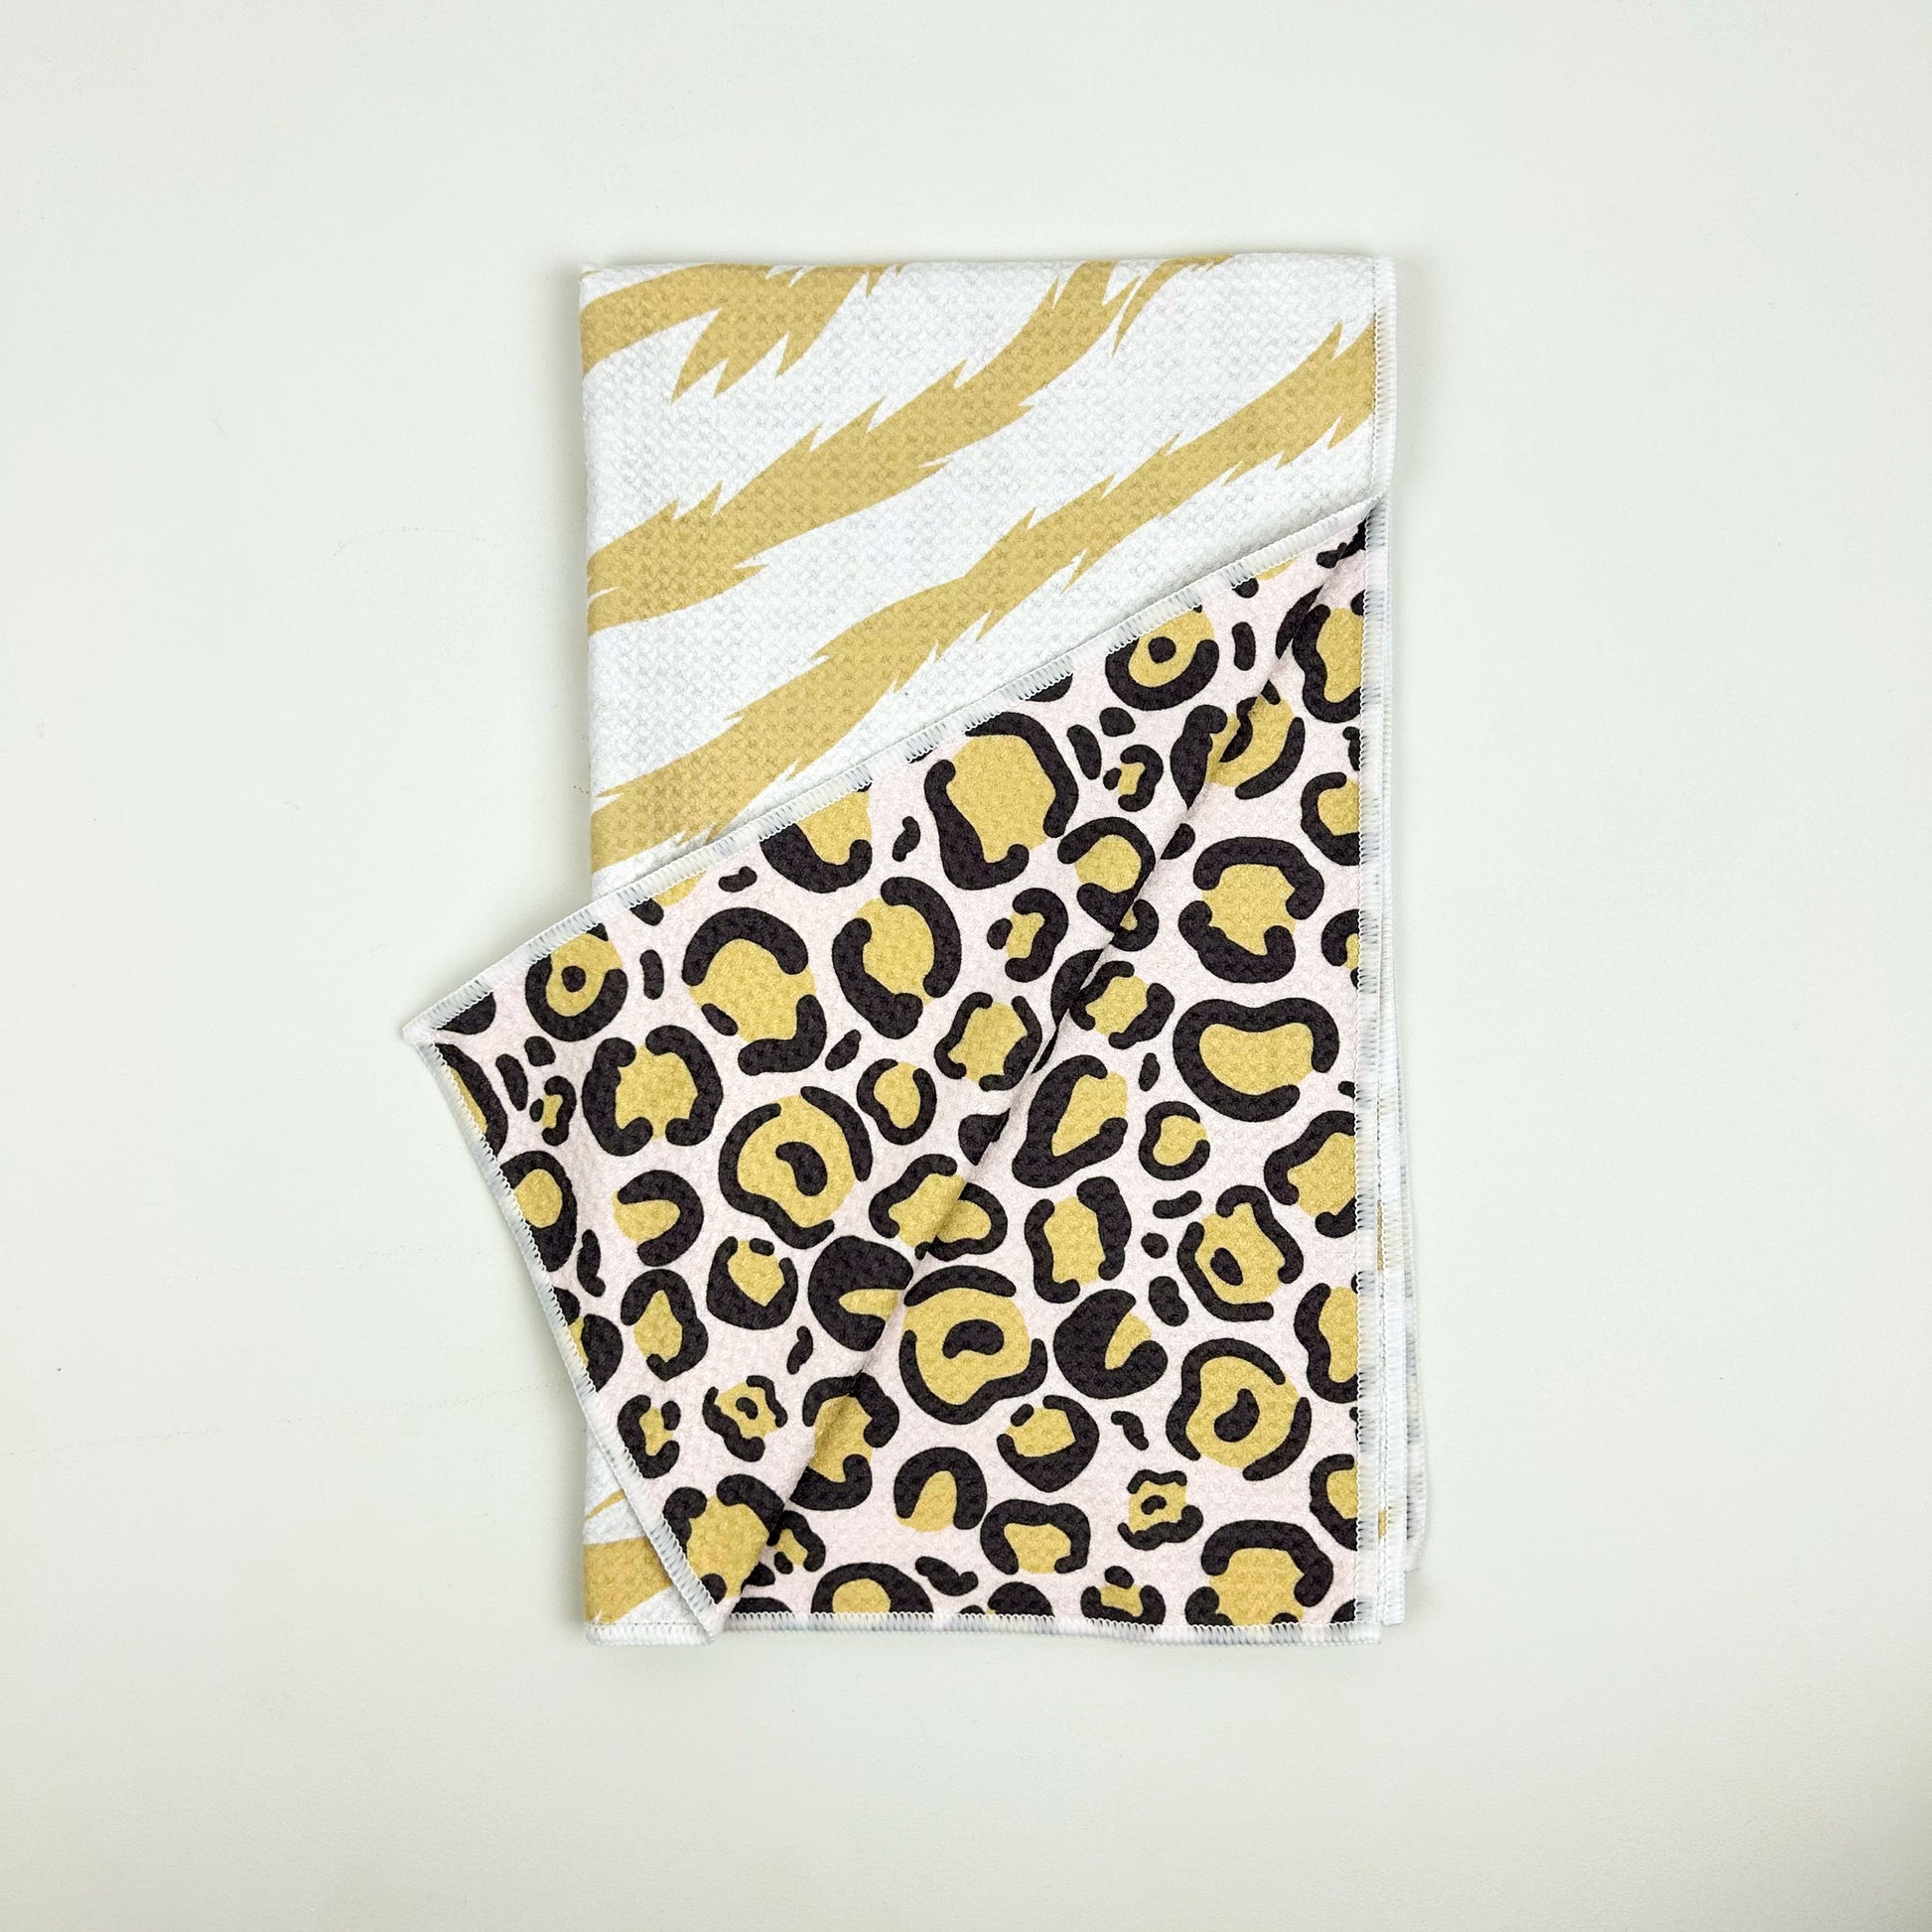 Waffle Weave Kitchen Towels with Animal Prints (R)